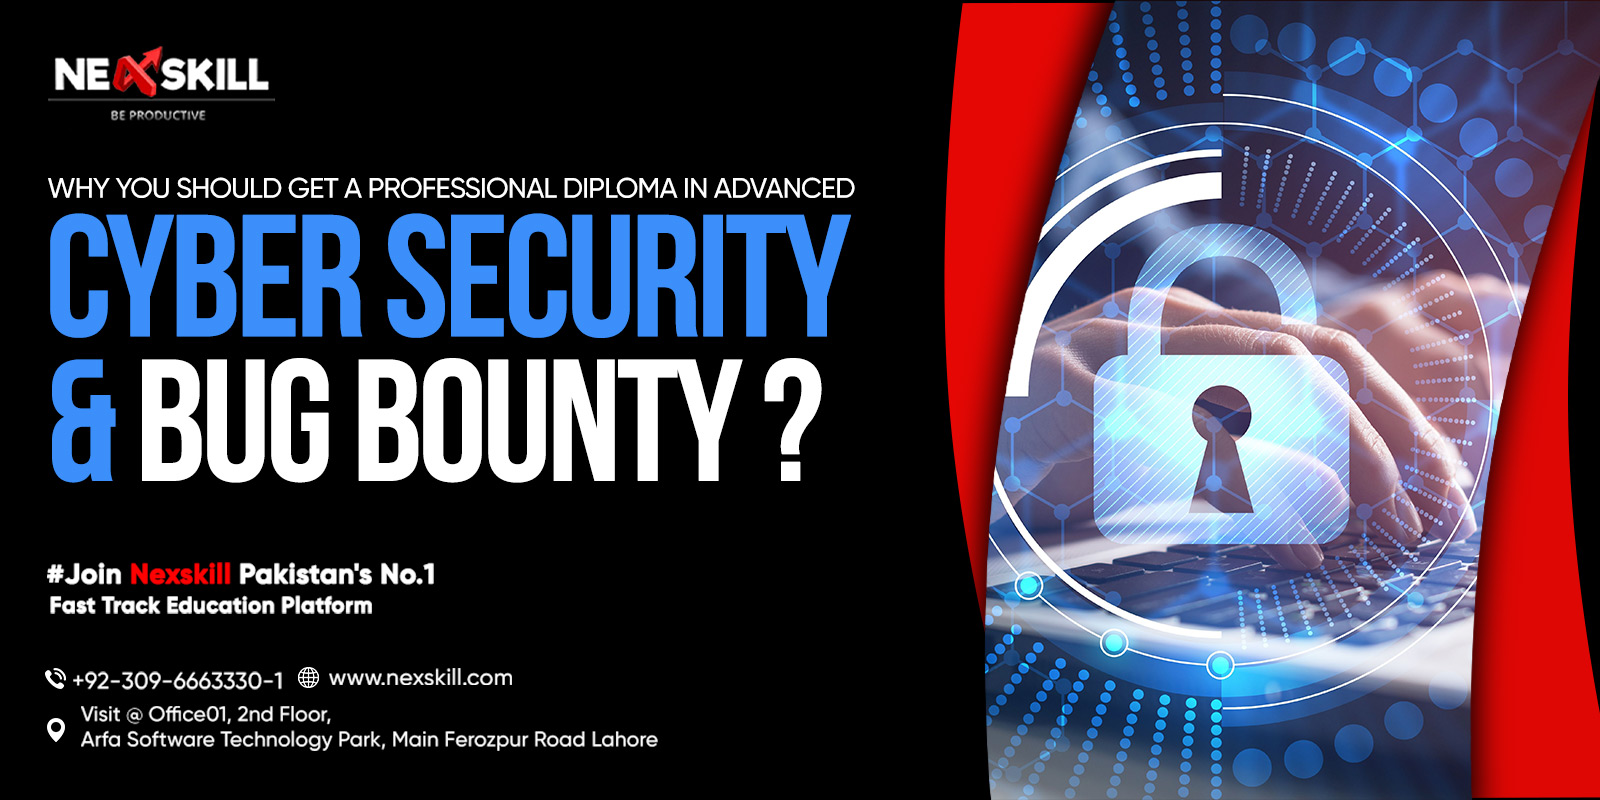 Why You Should Get a Professional Diploma in Advanced Cyber Security and Bug Bounty